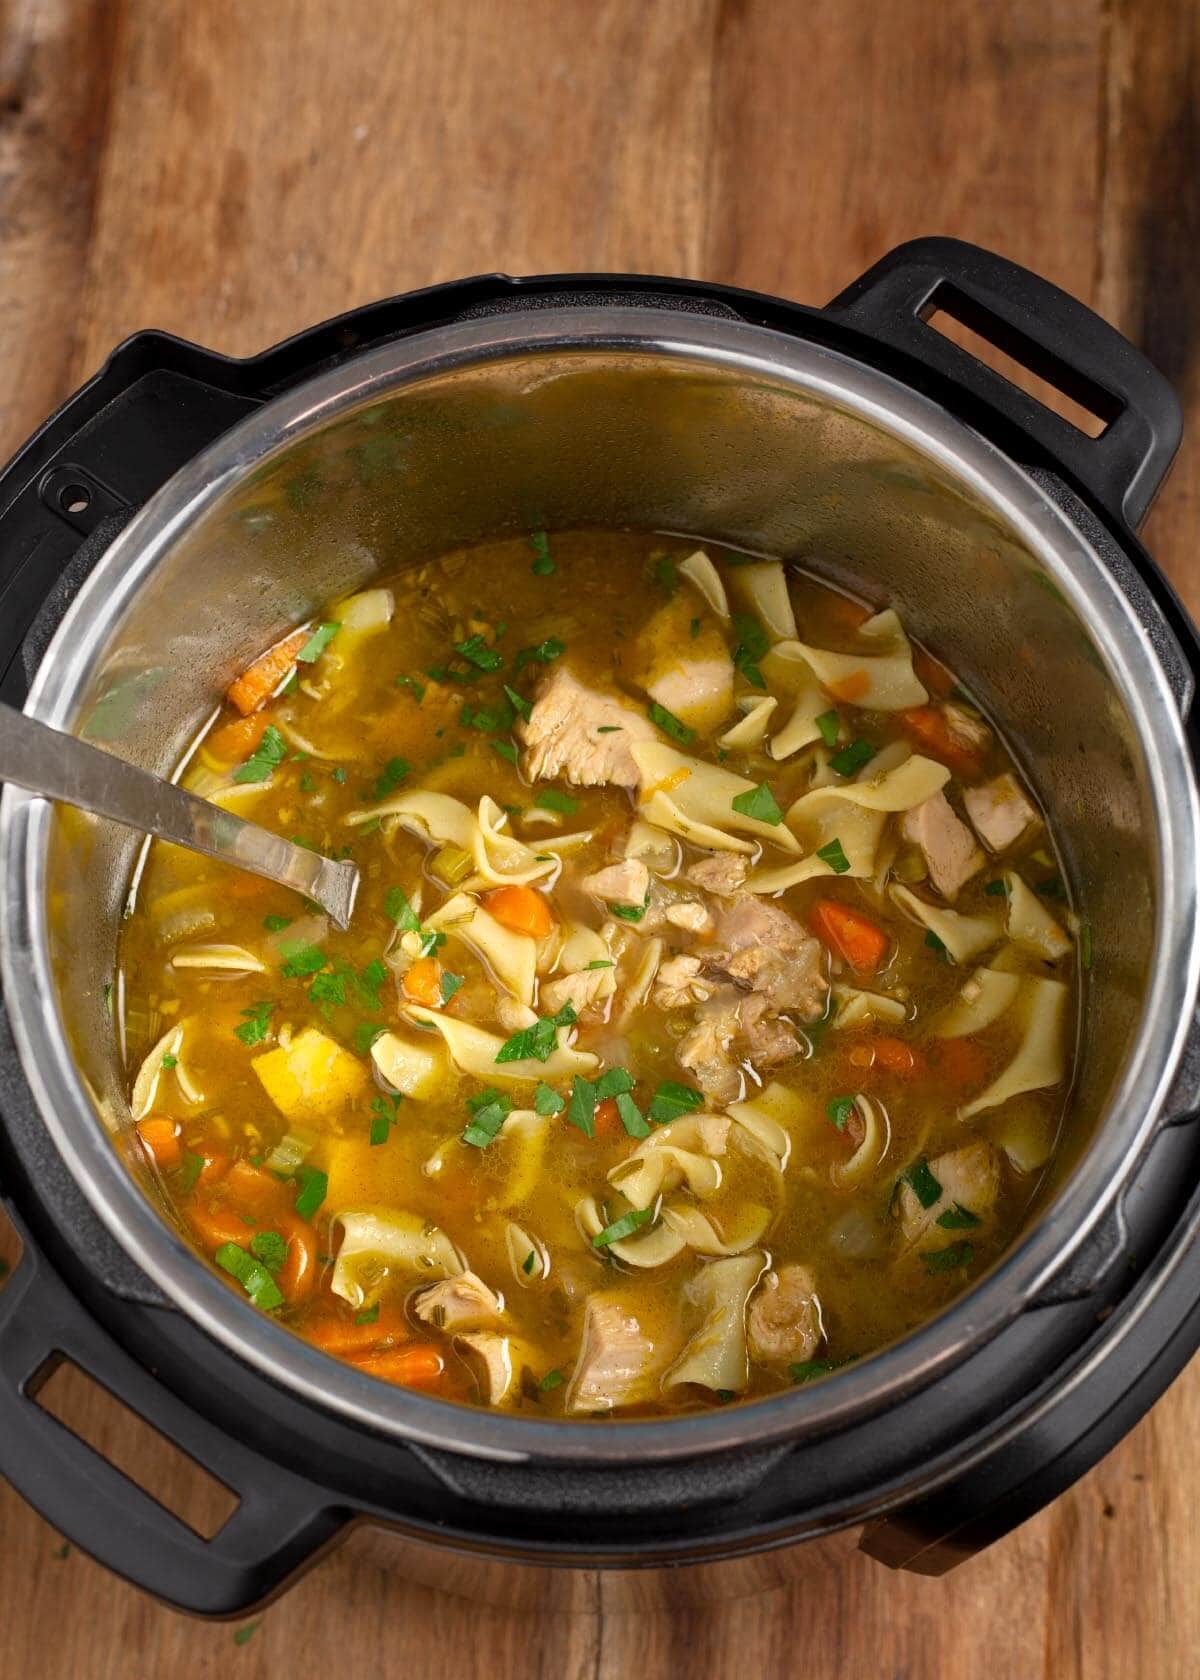 Instant Pot Turkey Soup in the pot from above